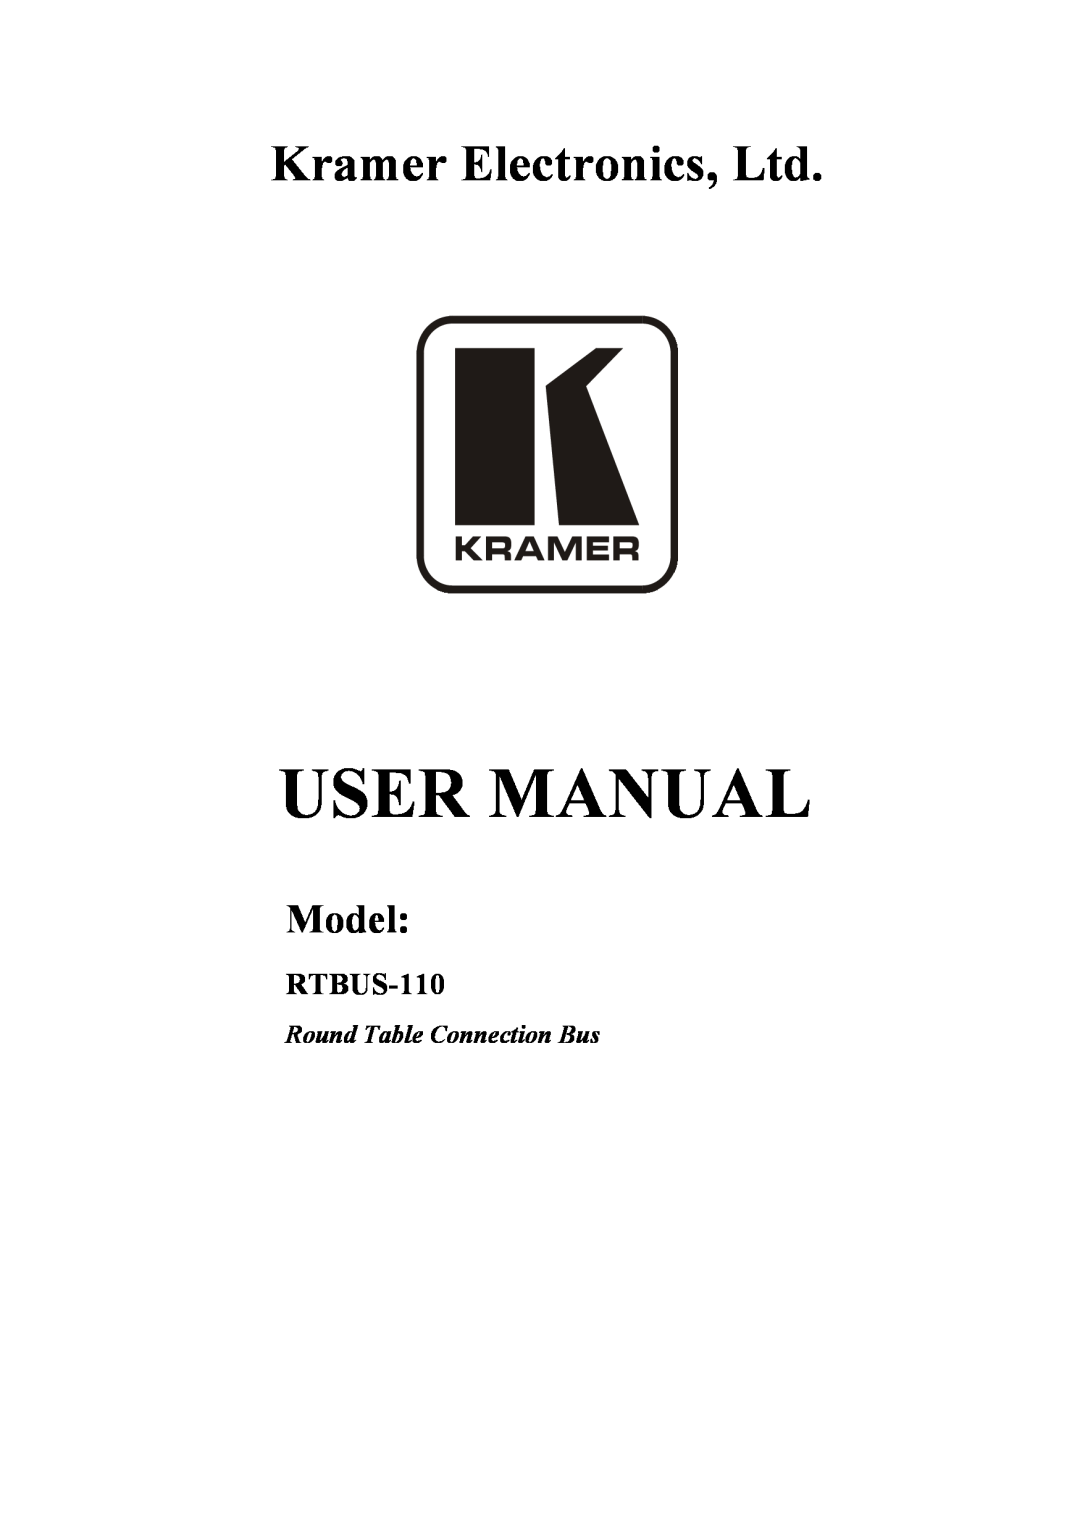 Kramer Electronics RTBUS-110 user manual Model, Round Table Connection Bus 